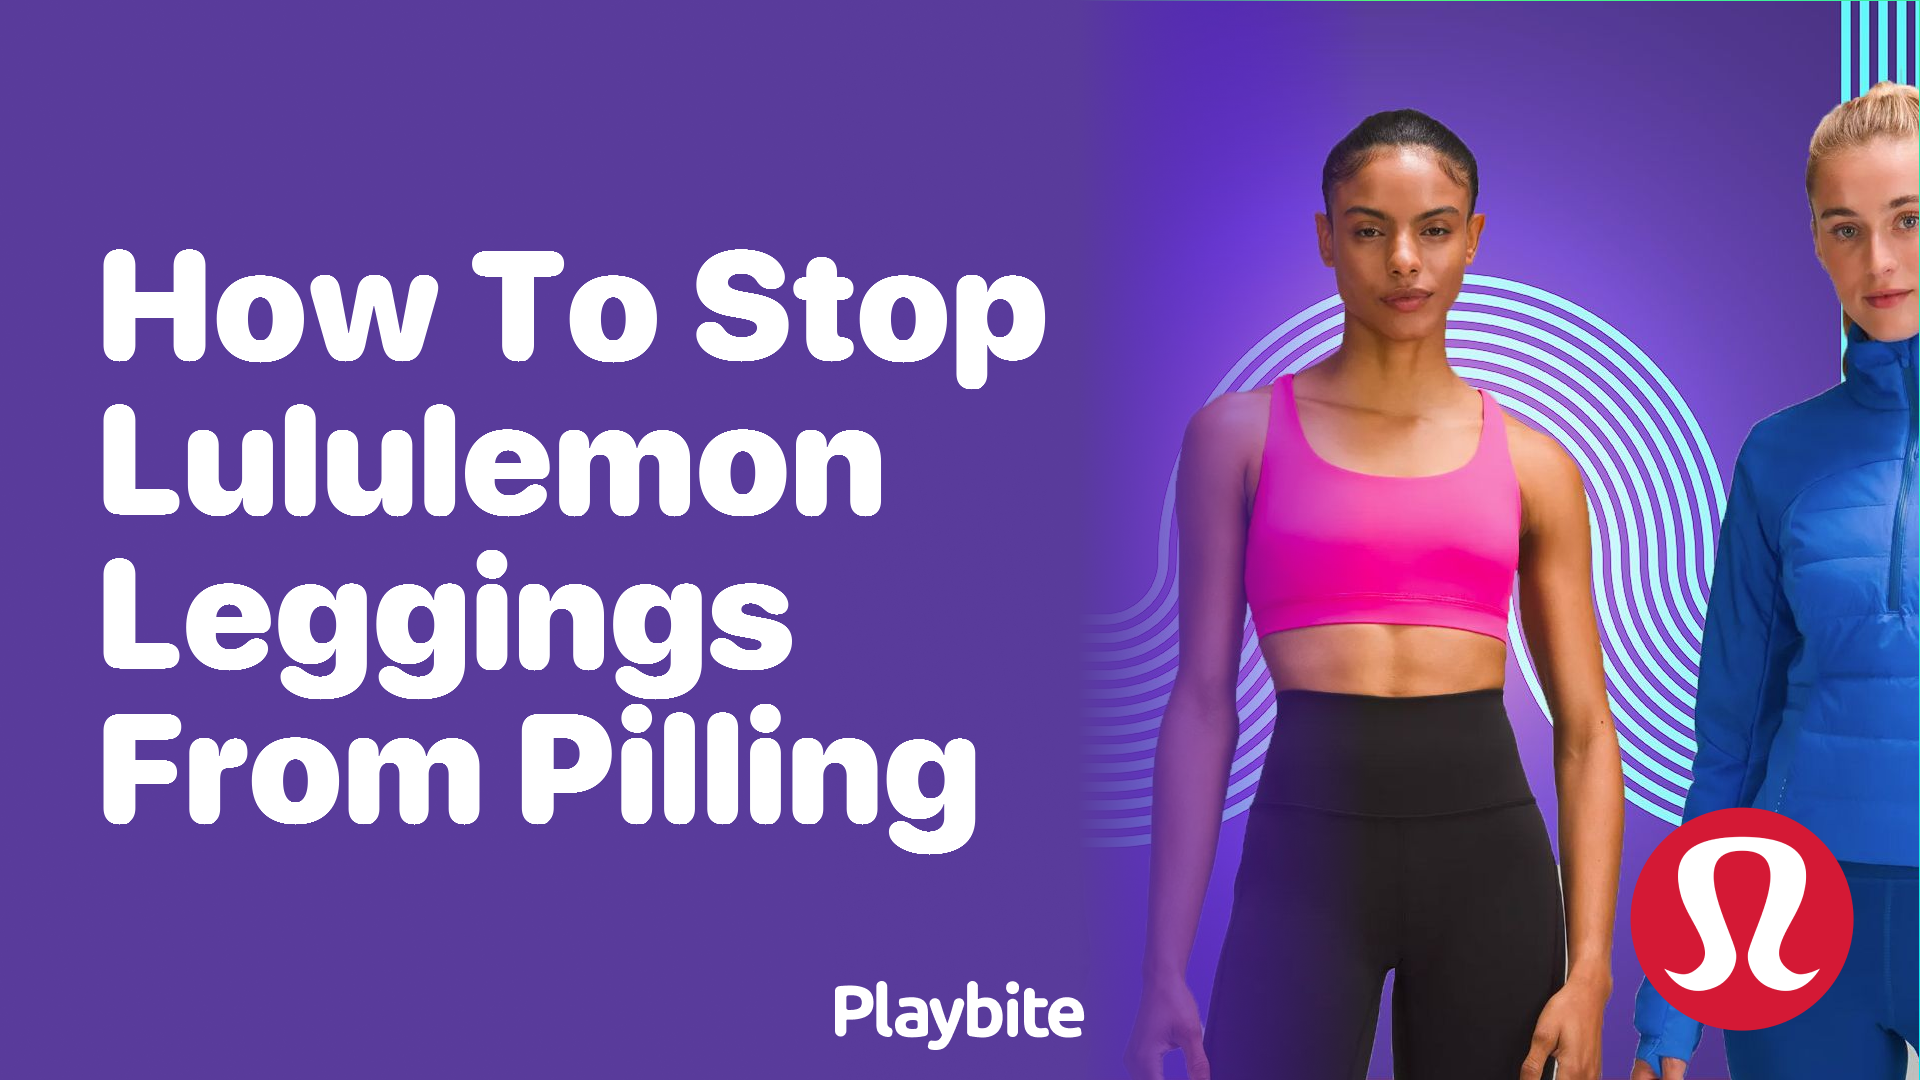 How to Stop Lululemon Leggings from Pilling: Quick Tips - Playbite